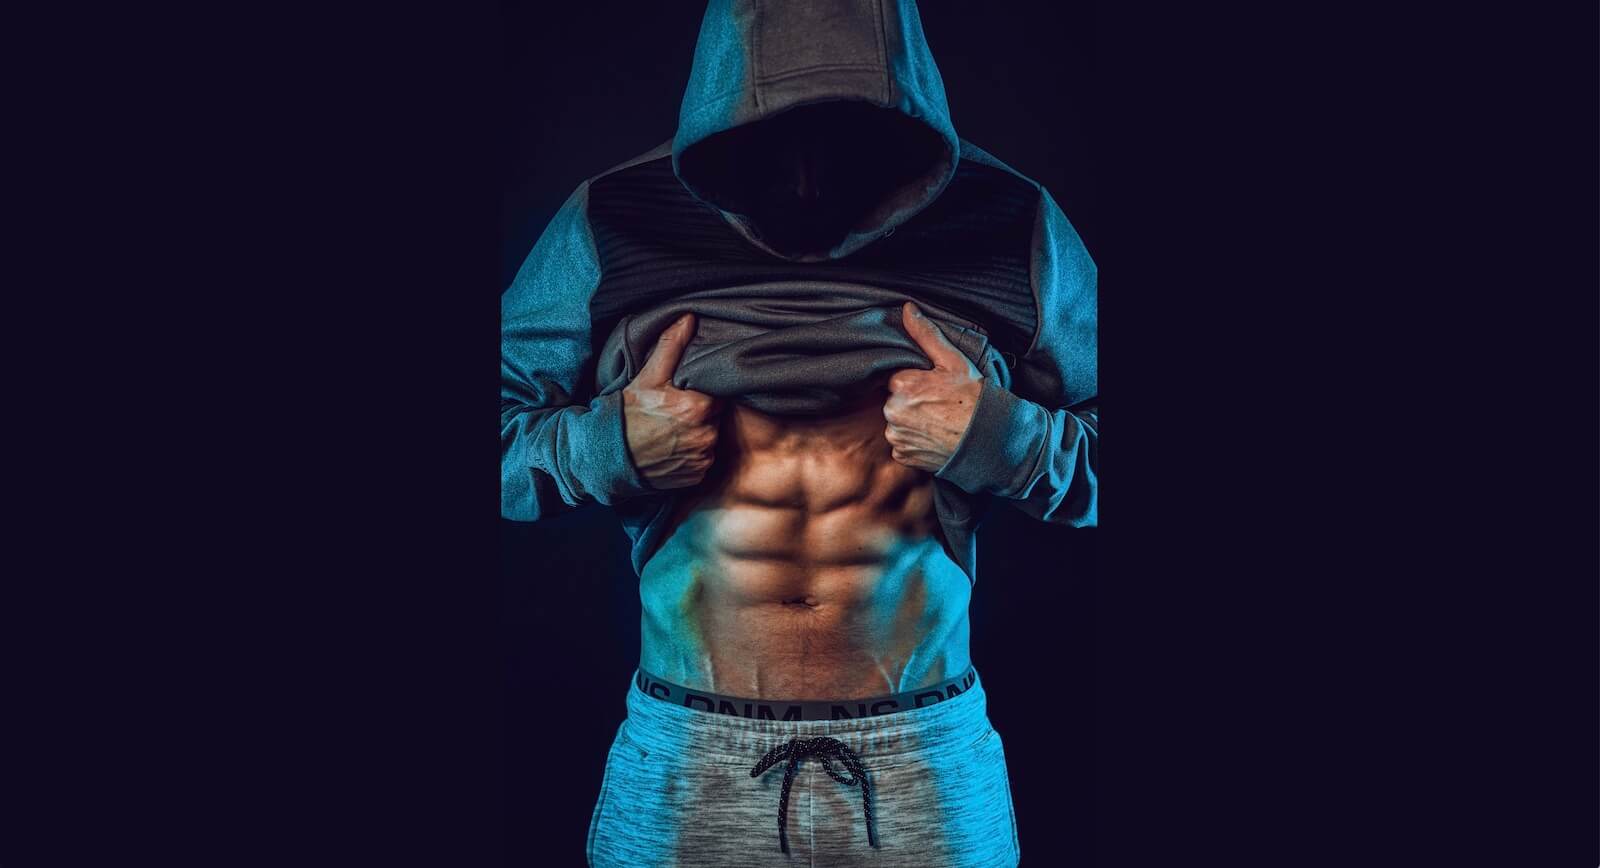 Bulking and cutting: is it safe for your metabolism?